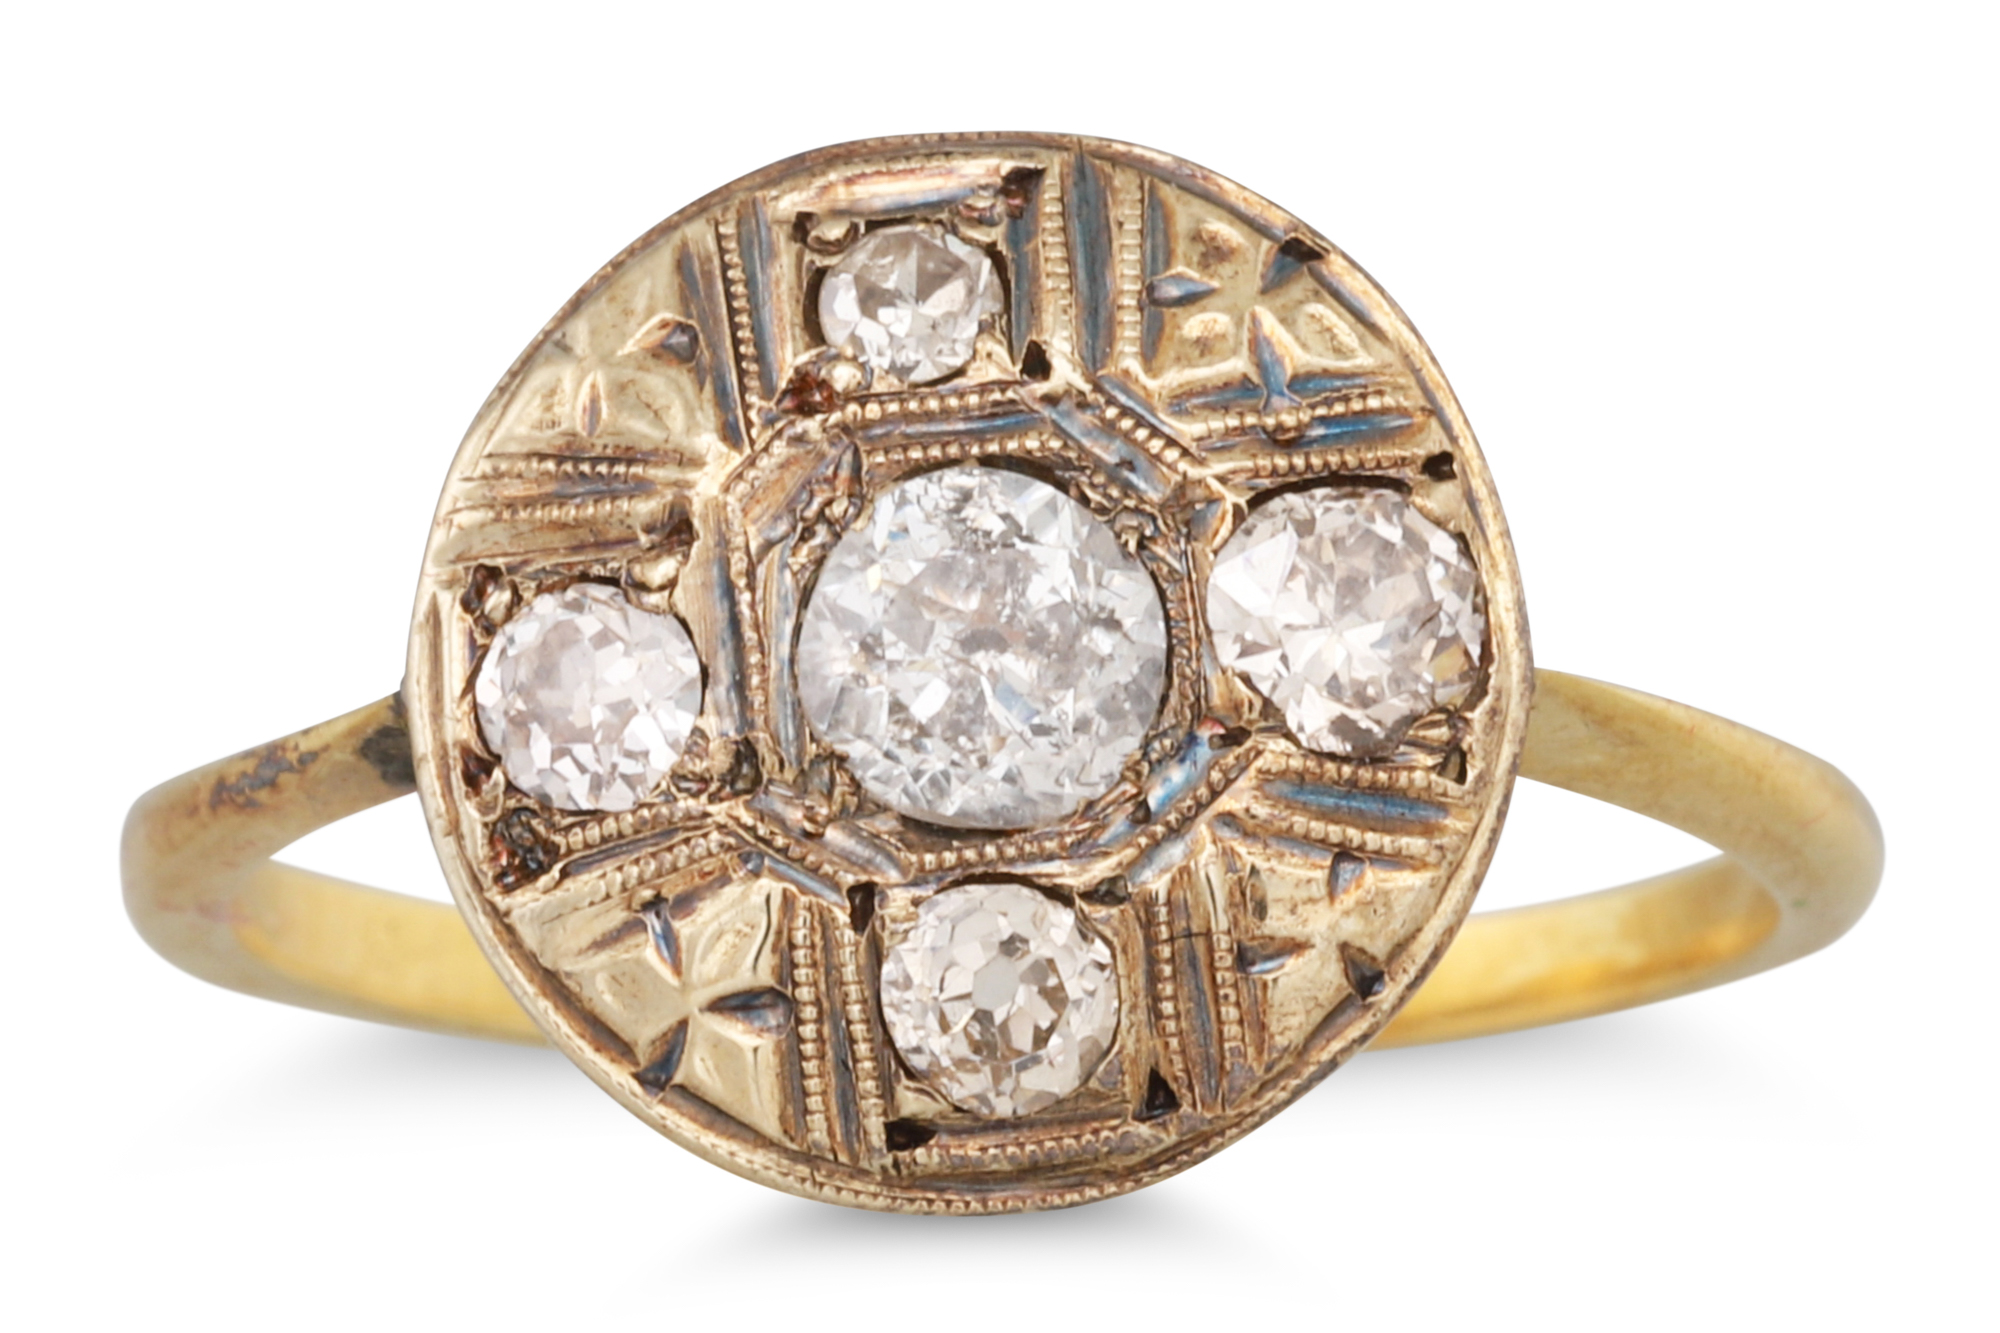 A VINTAGE DIAMOND CLUSTER RING, the circular plaque set with old cut diamonds, mounted in 18ct gold,